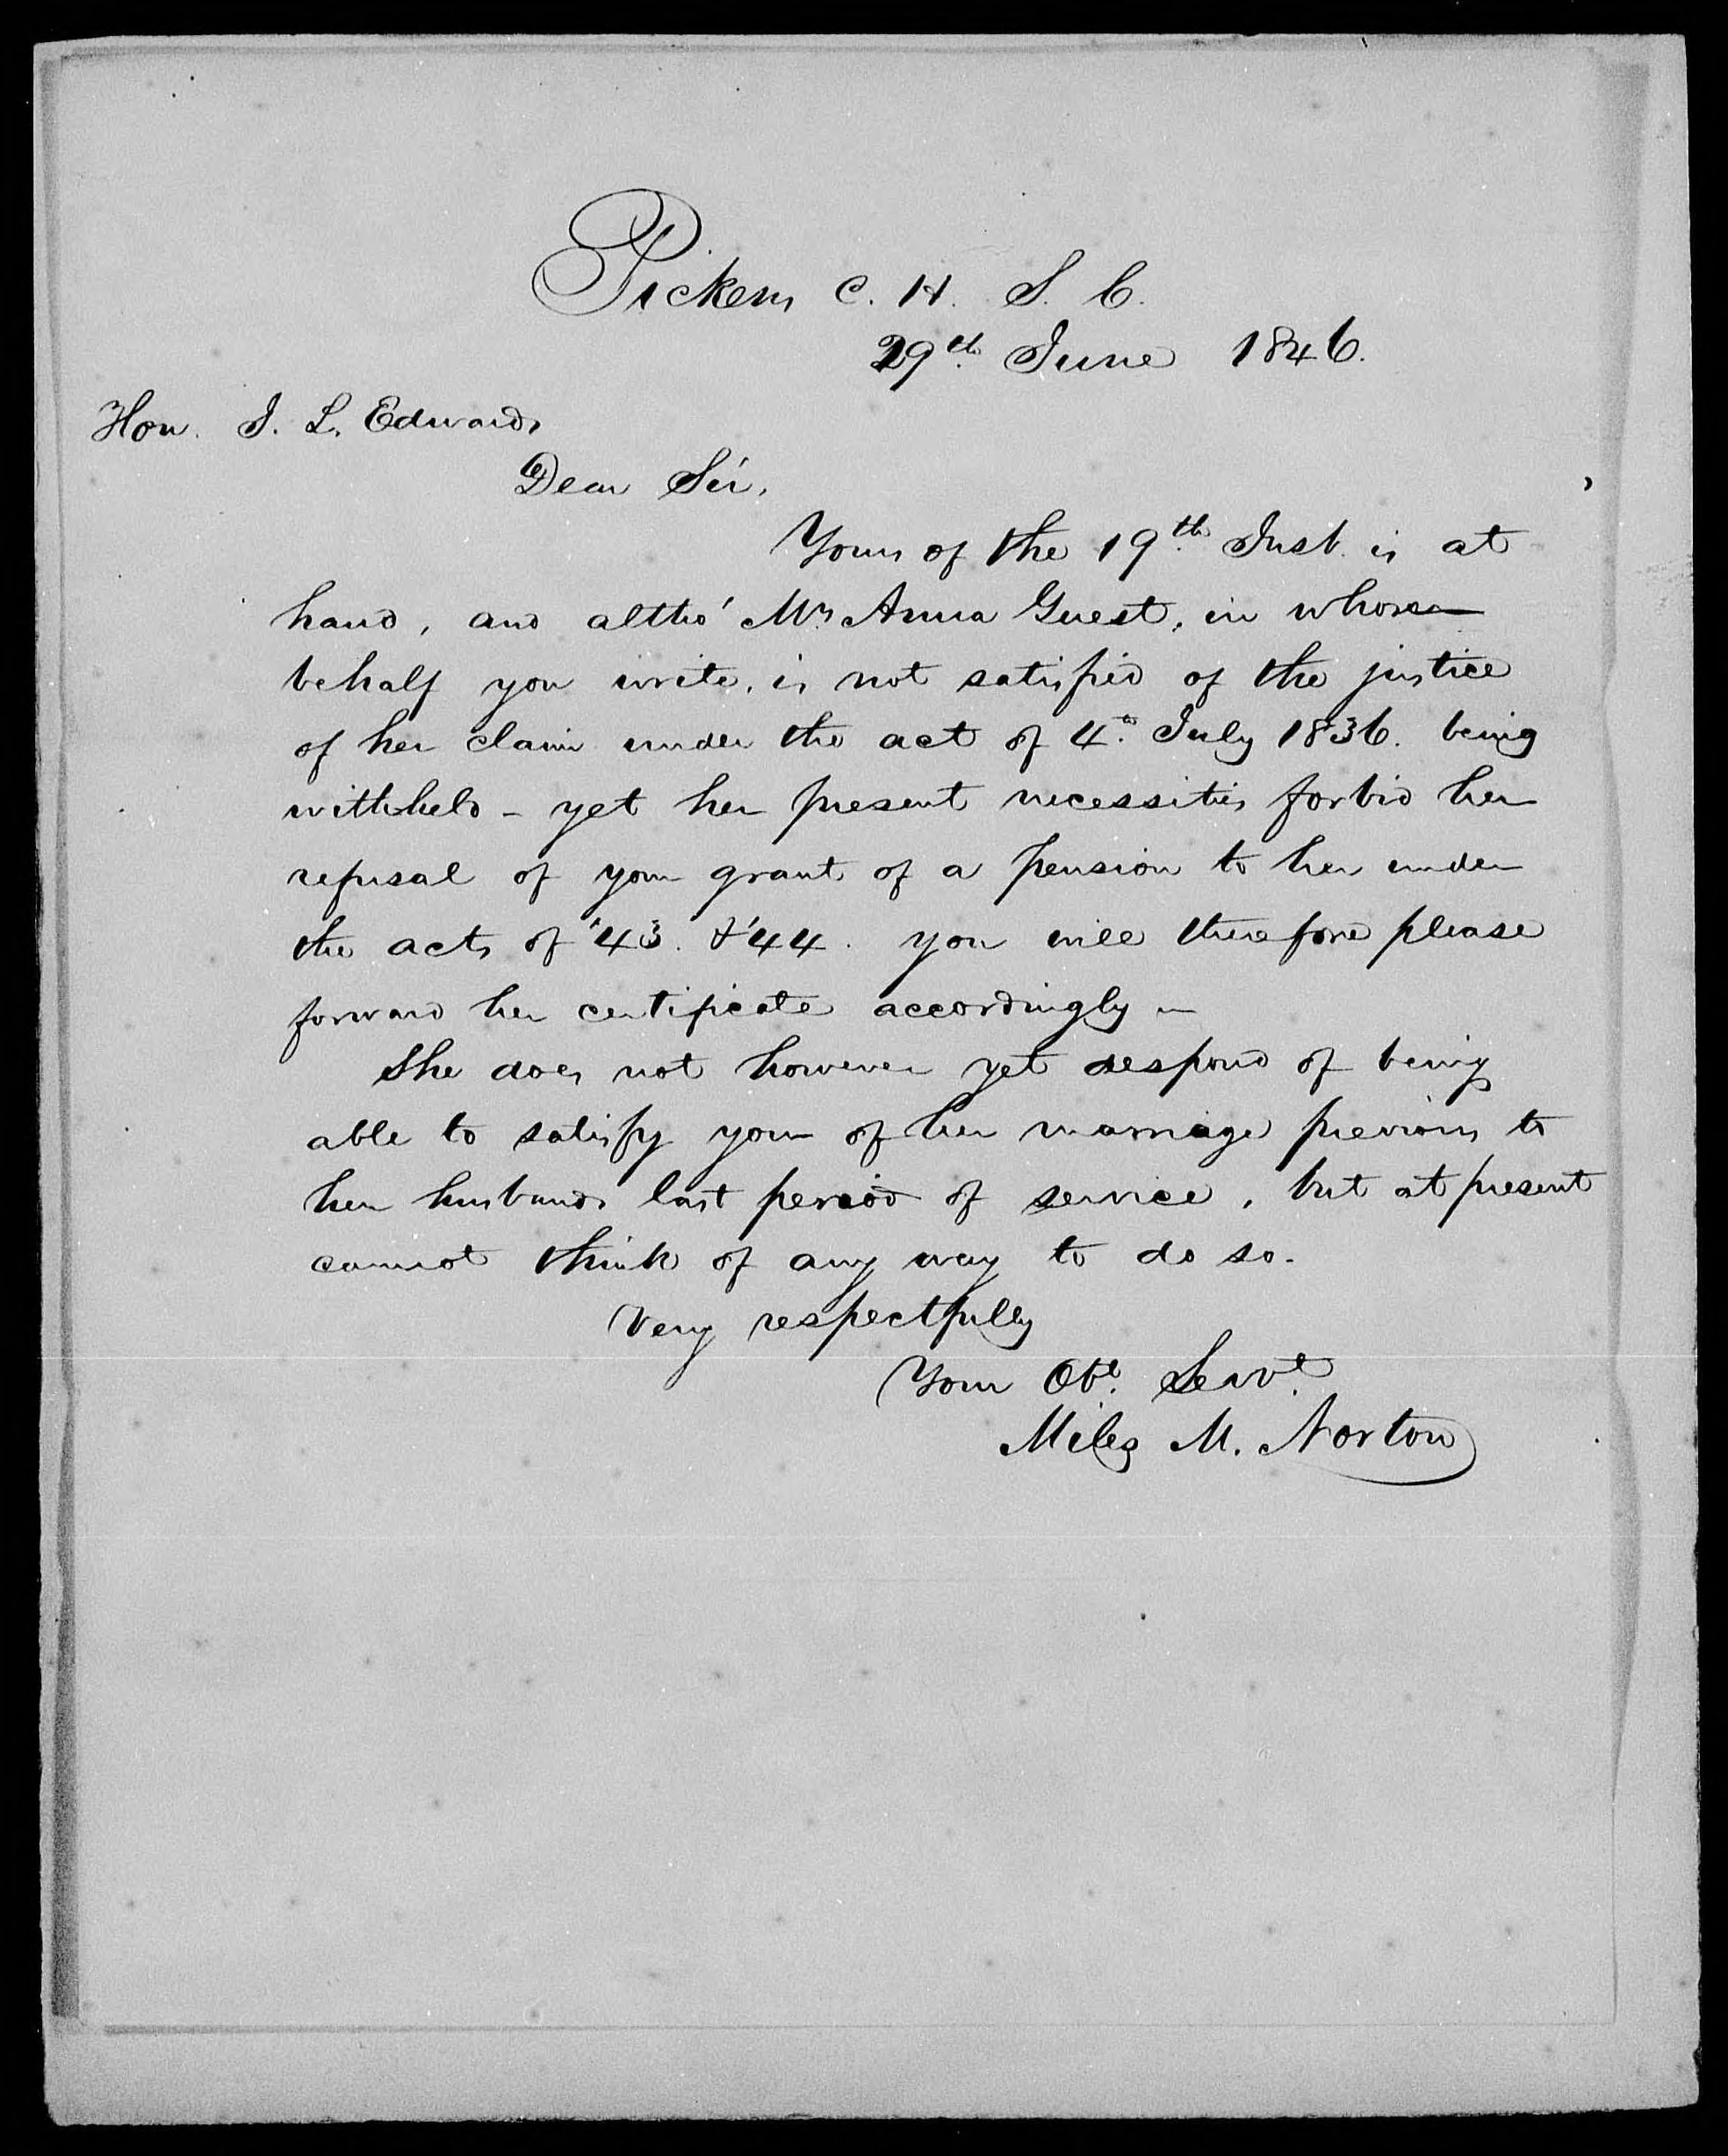 Letter from Miles M. Norton to James L. Edwards, 29 June 1846, page 1